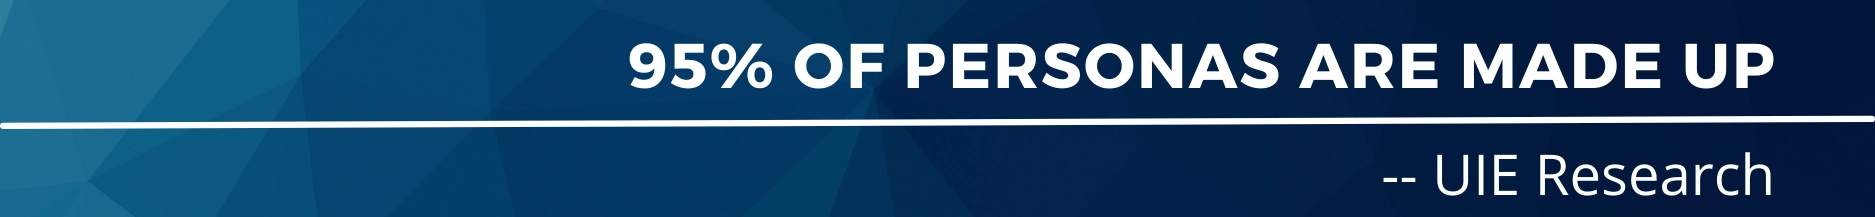 Bar stating that 95% of personas are made up